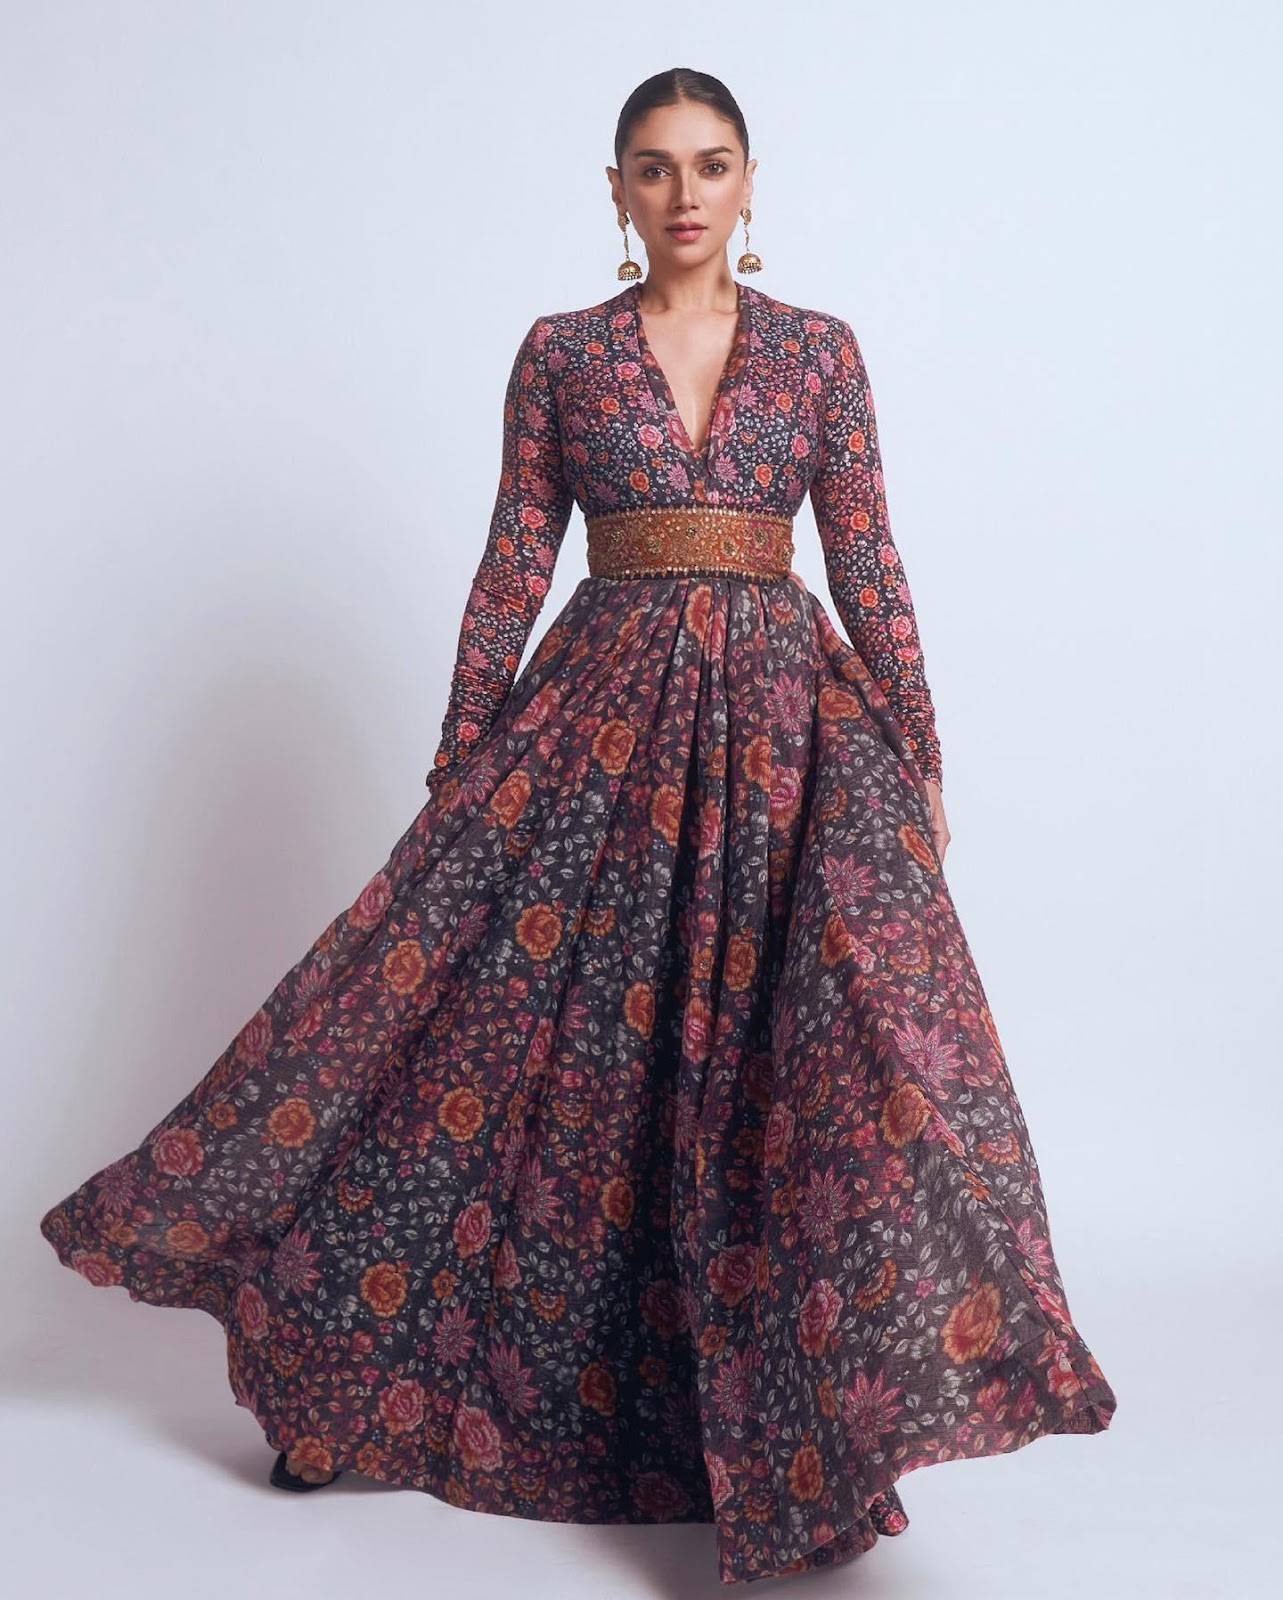 Aditi Rao Hydari looks radiant in floral anarkali rendered in jersey and  satin organza. This India